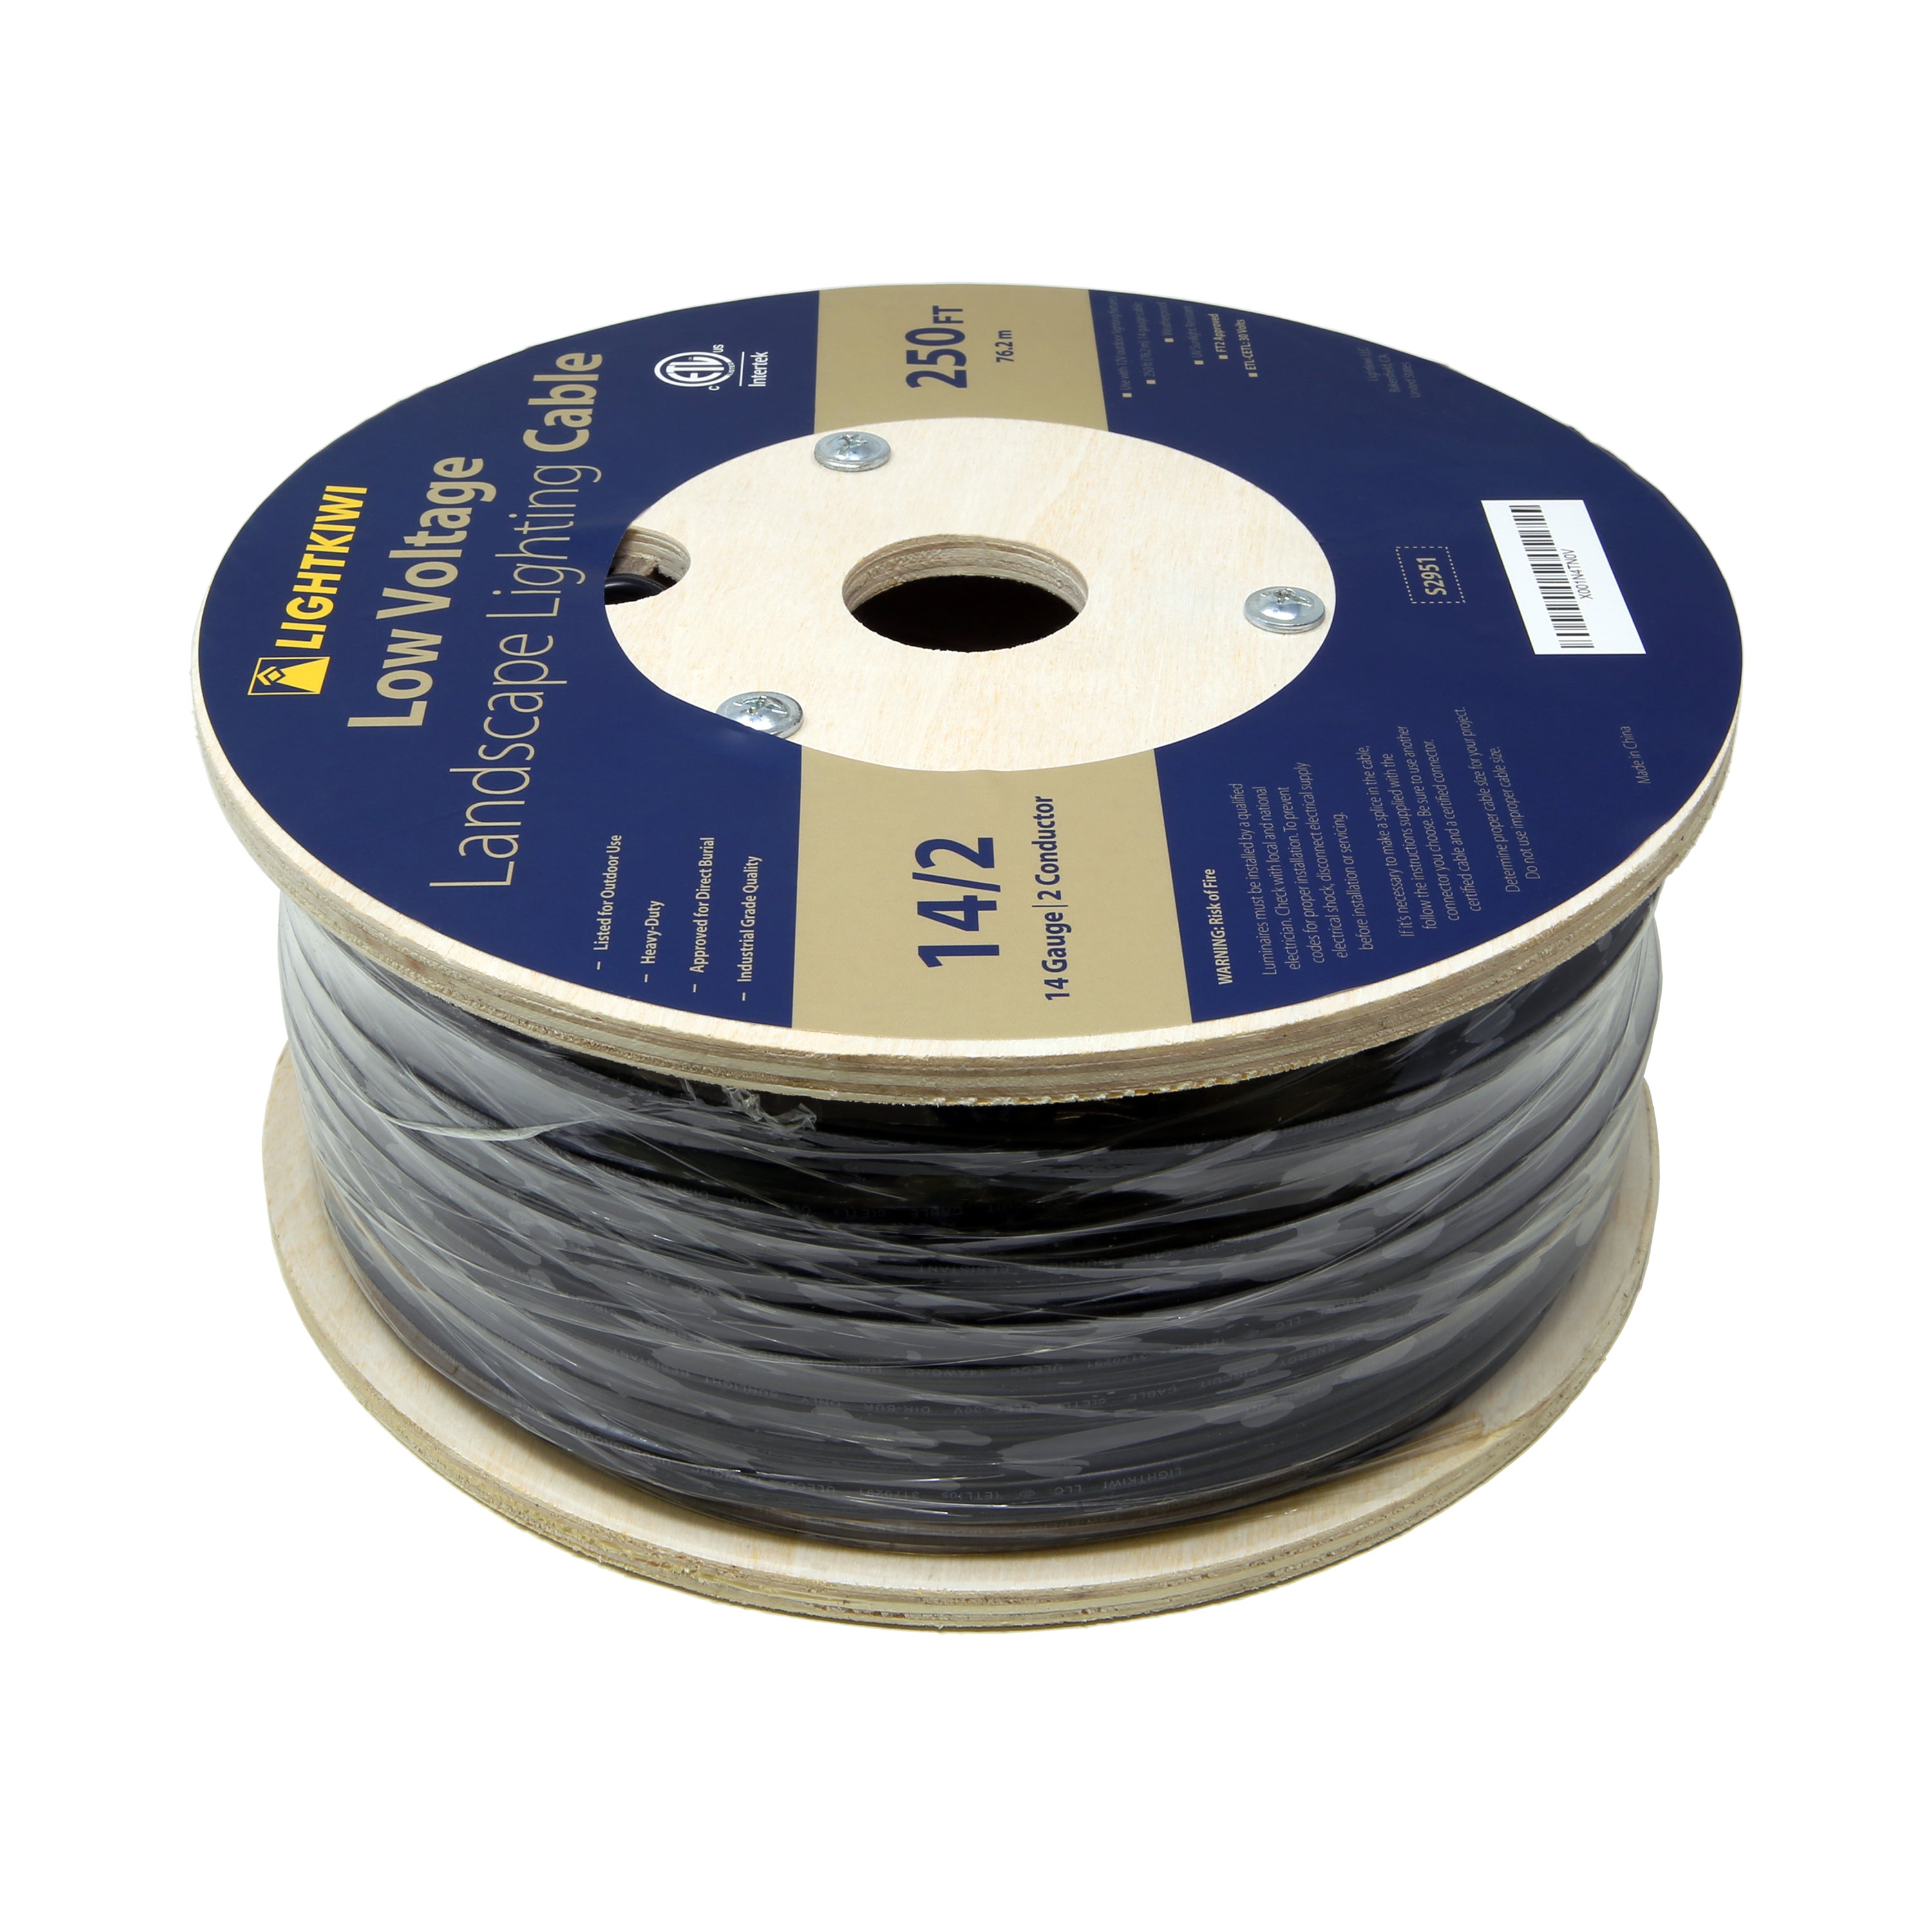 14AWG 2-Conductor Direct Burial Wire for Low Voltage Landscape Lighting, 250ft